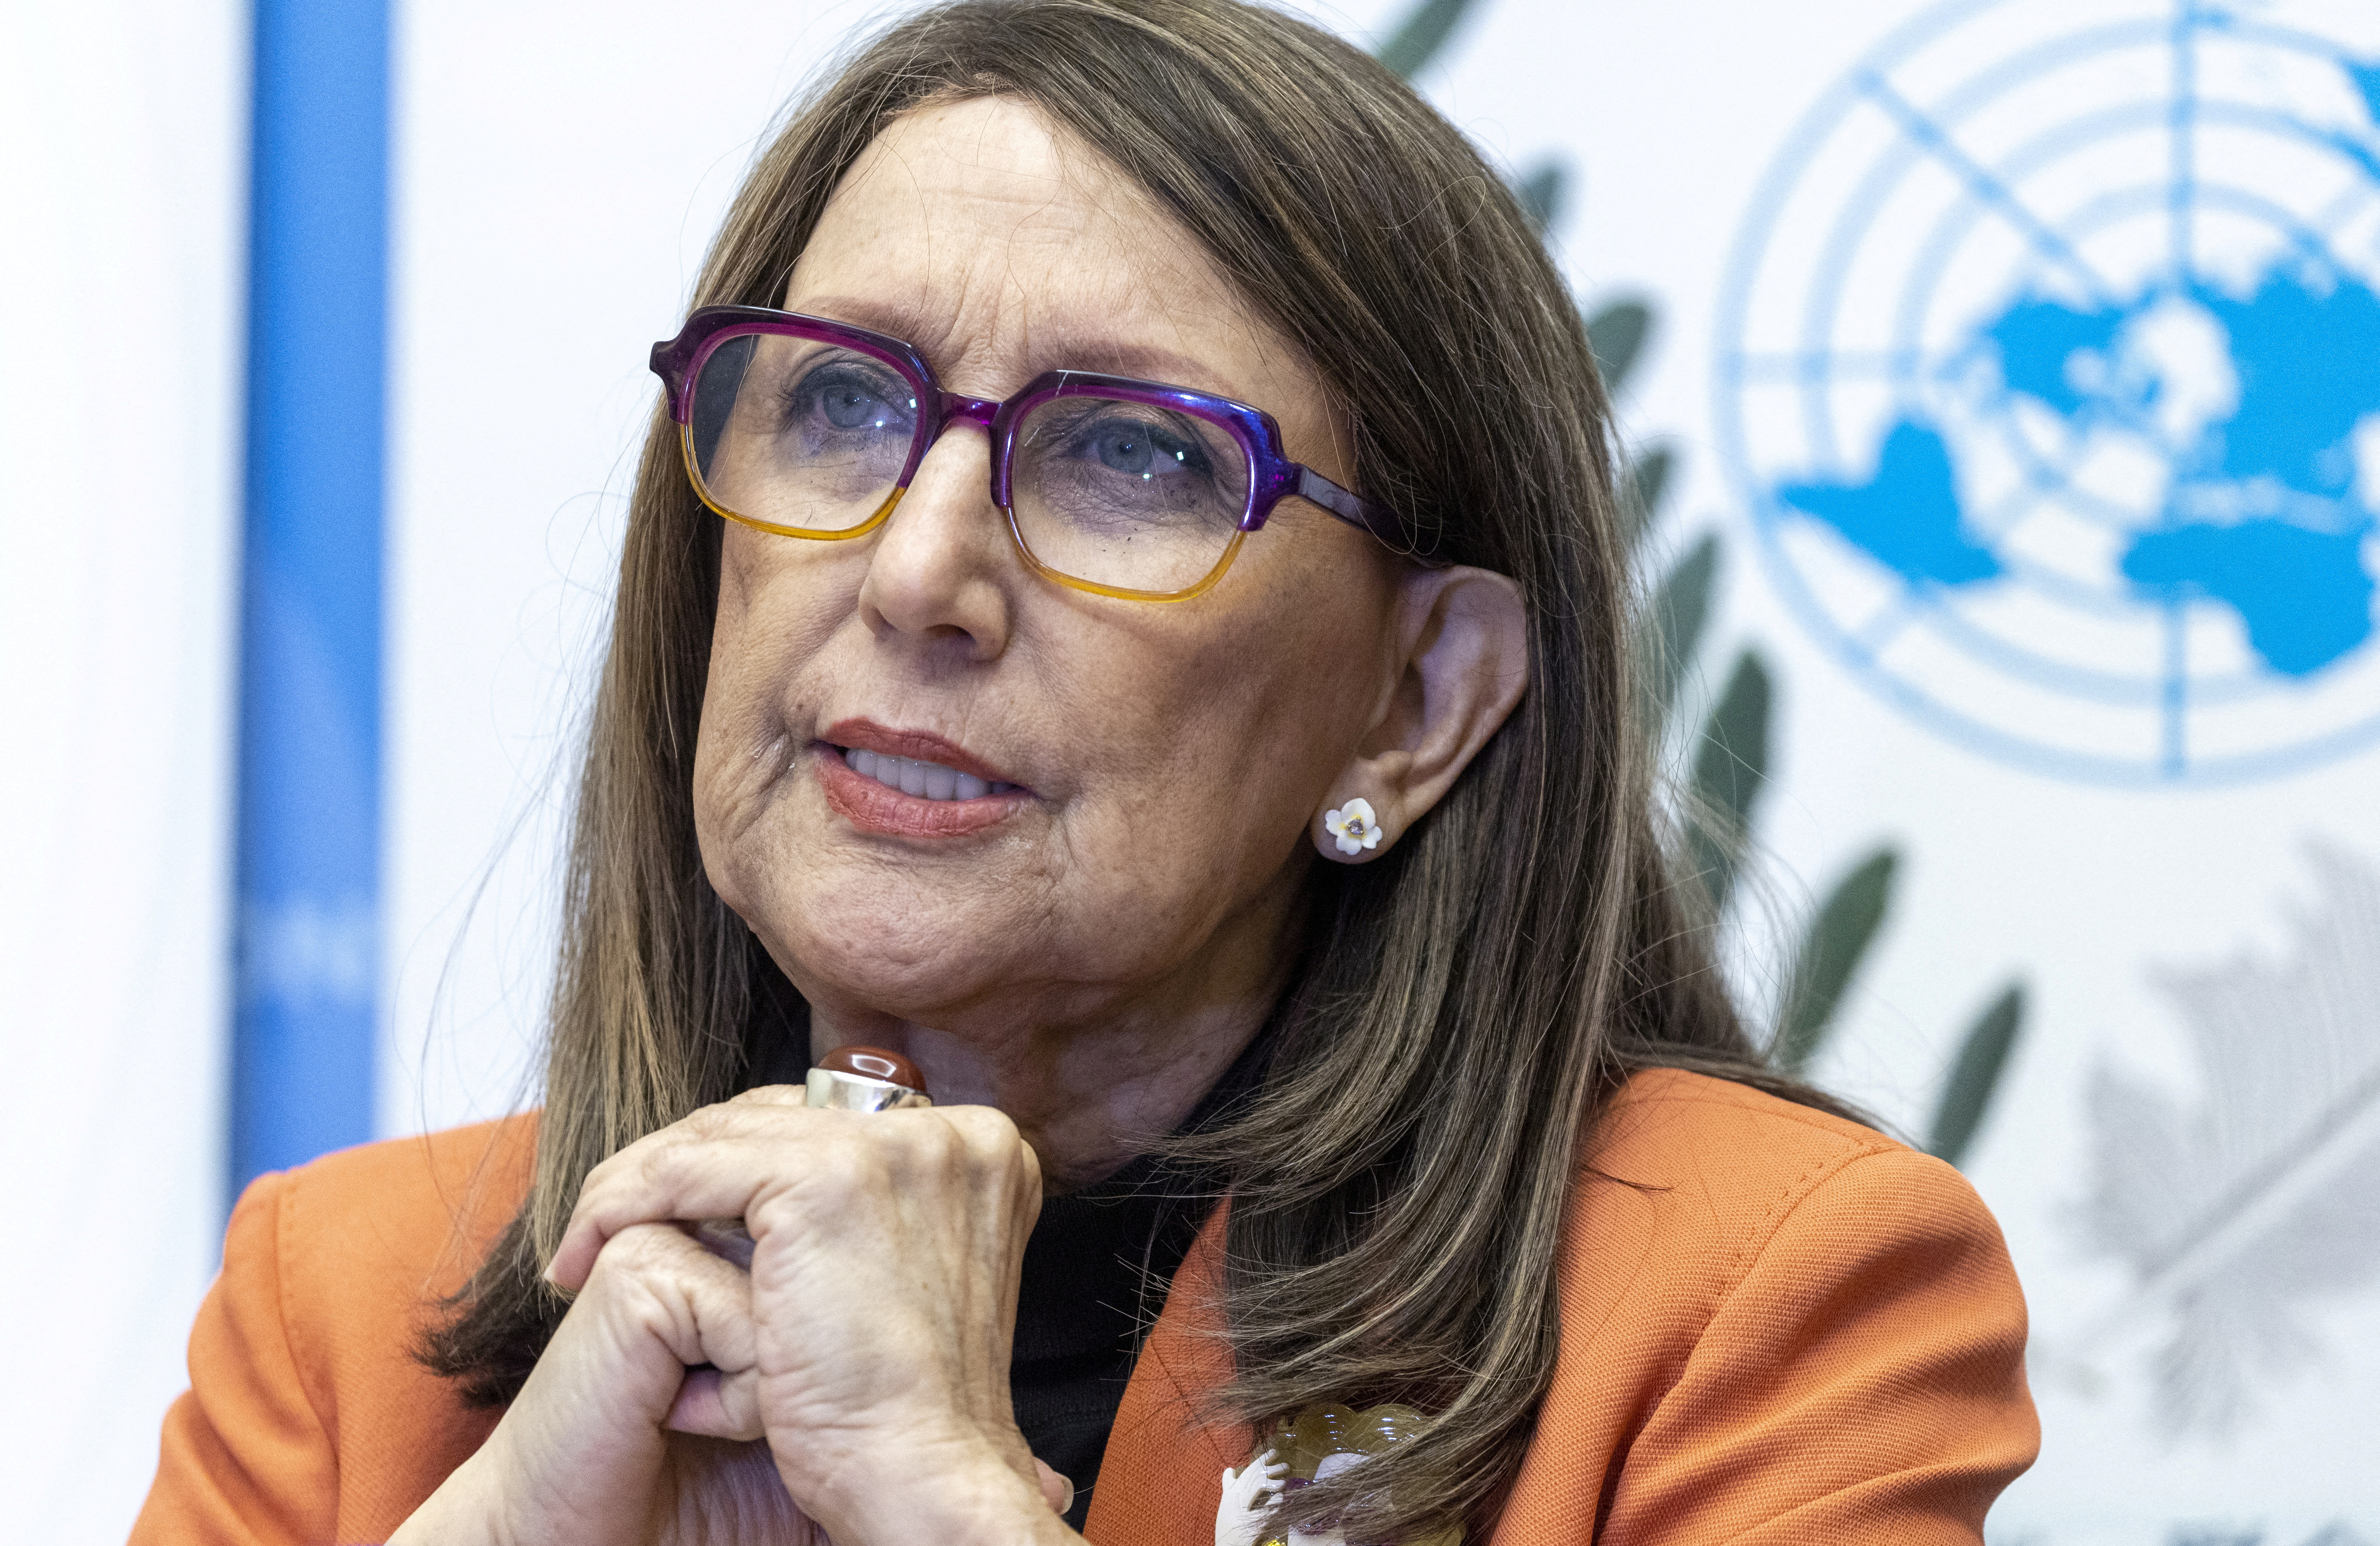 Grynspan Secretary-General of the UNCTAD attends a news conference in Geneva